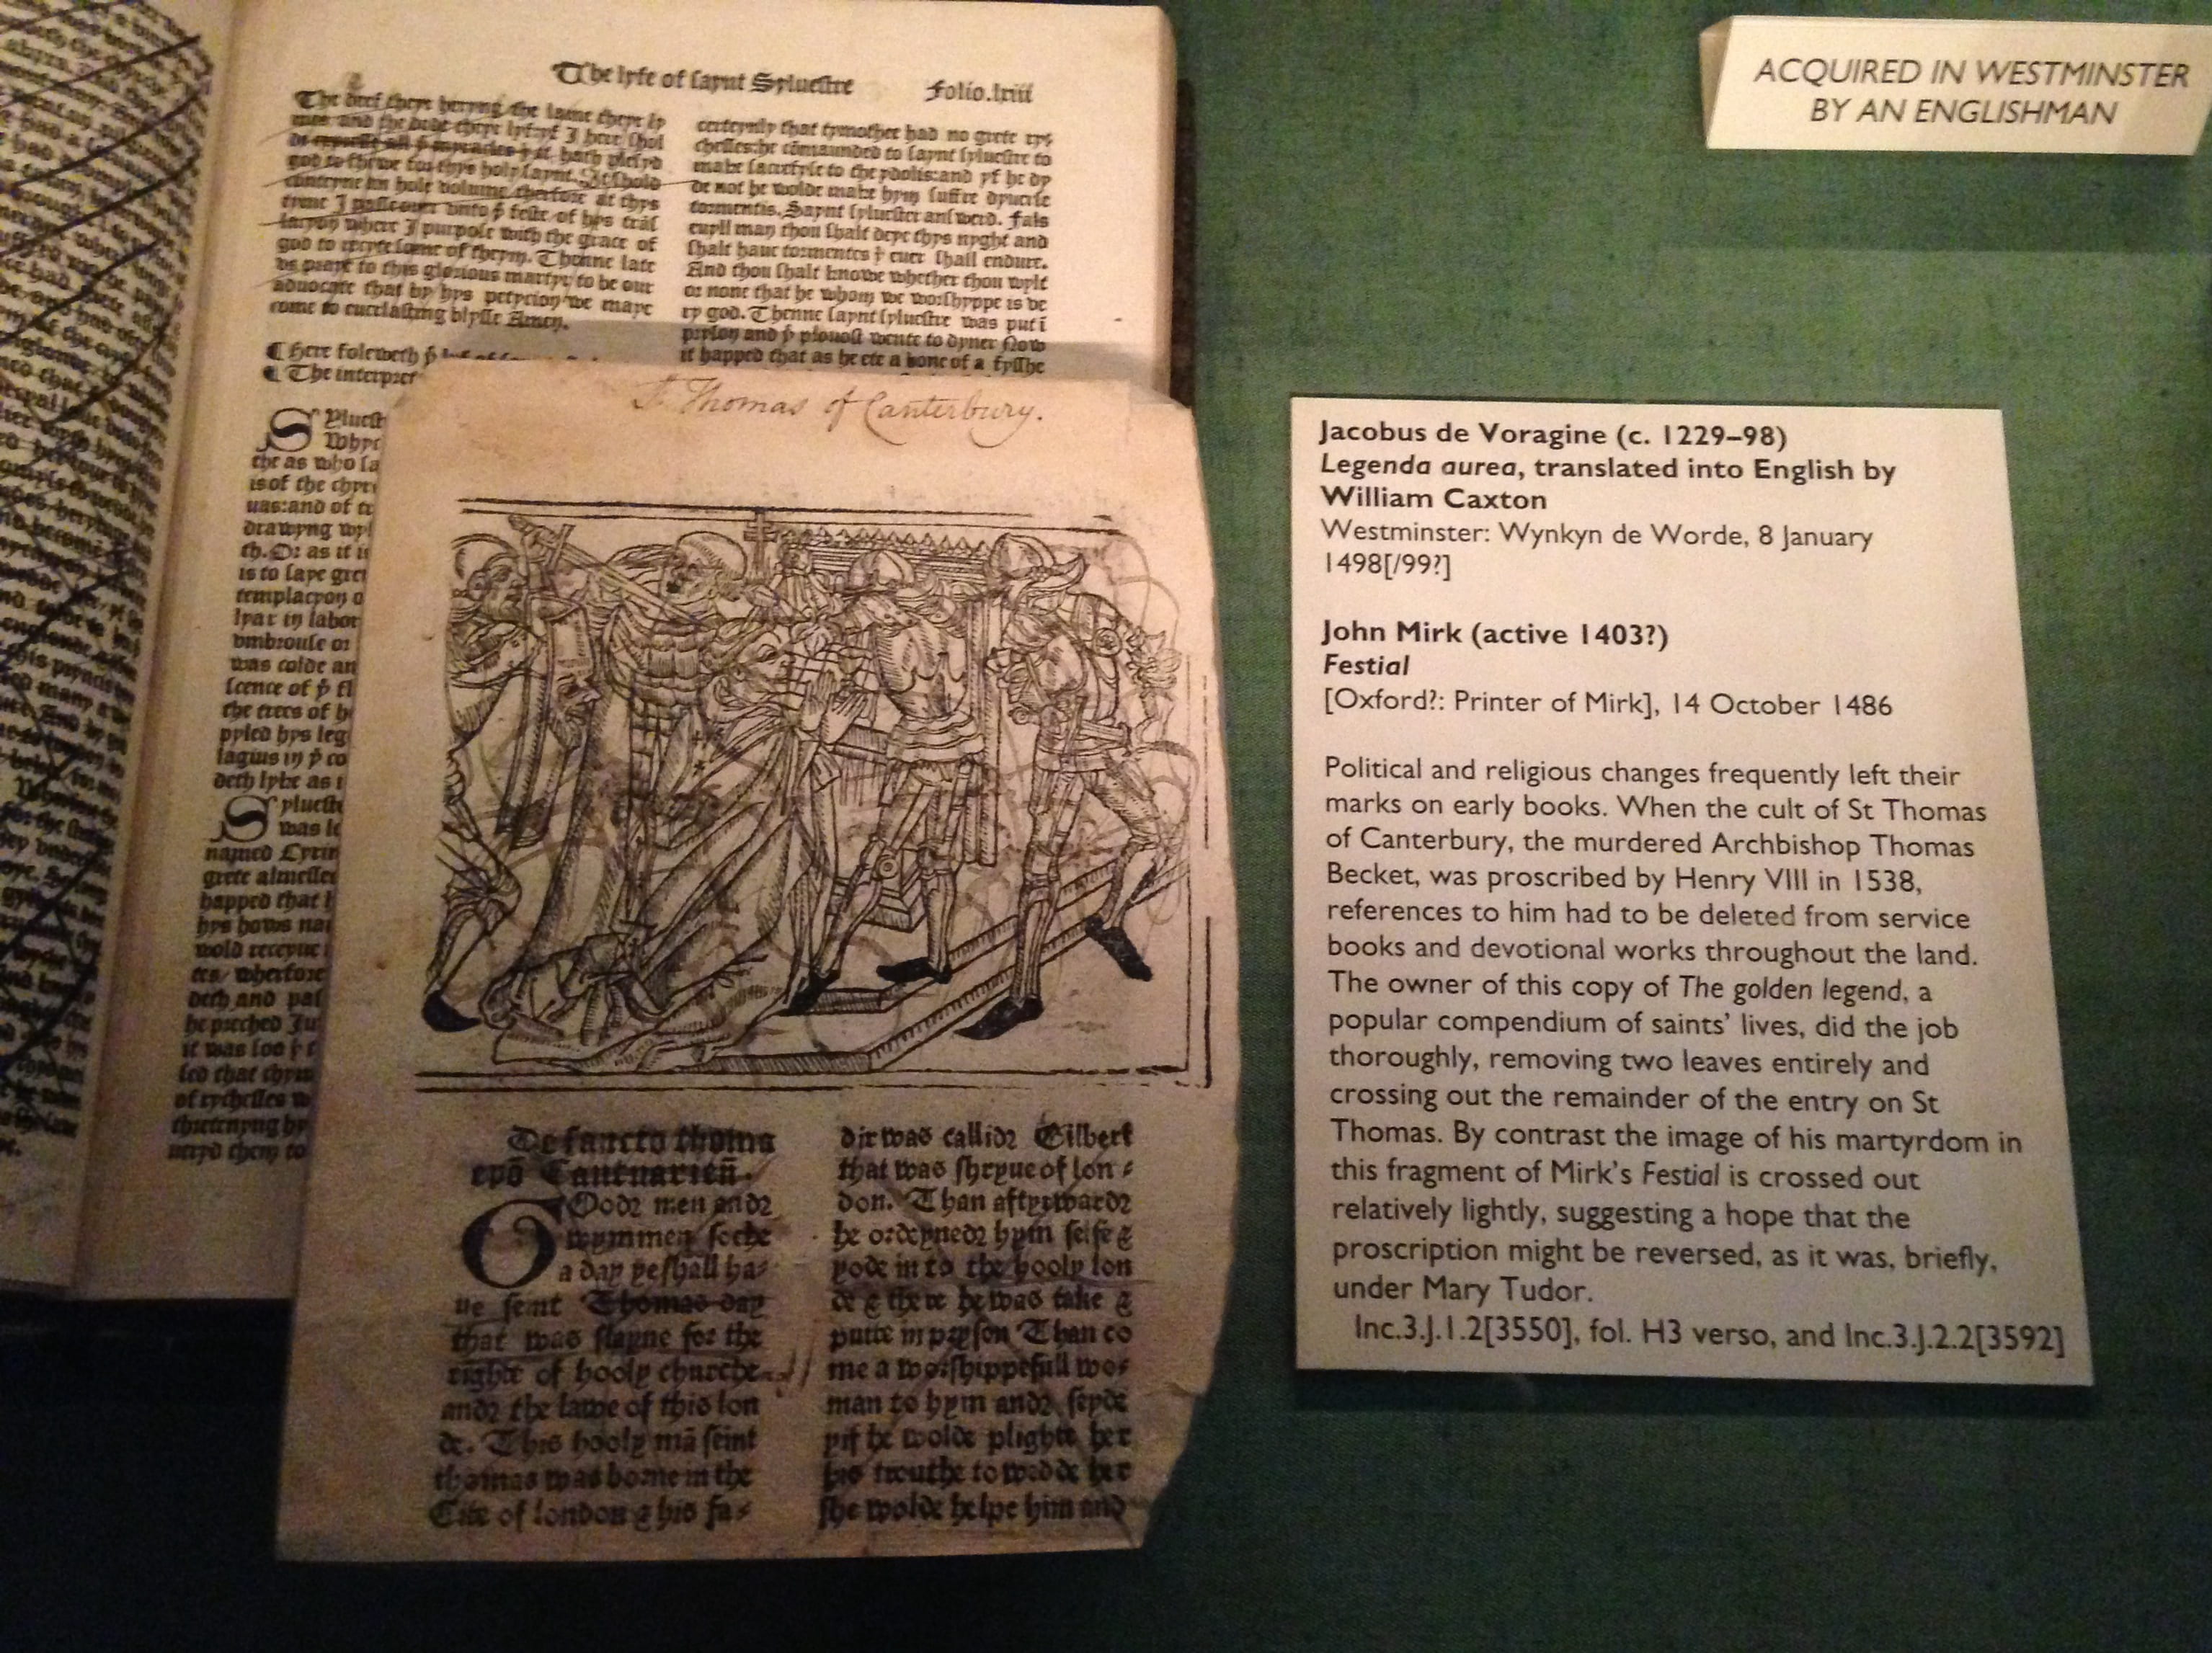 A defaced woodcut of Thomas Becket. Cambridge University Library. Photo by M. McMahon.